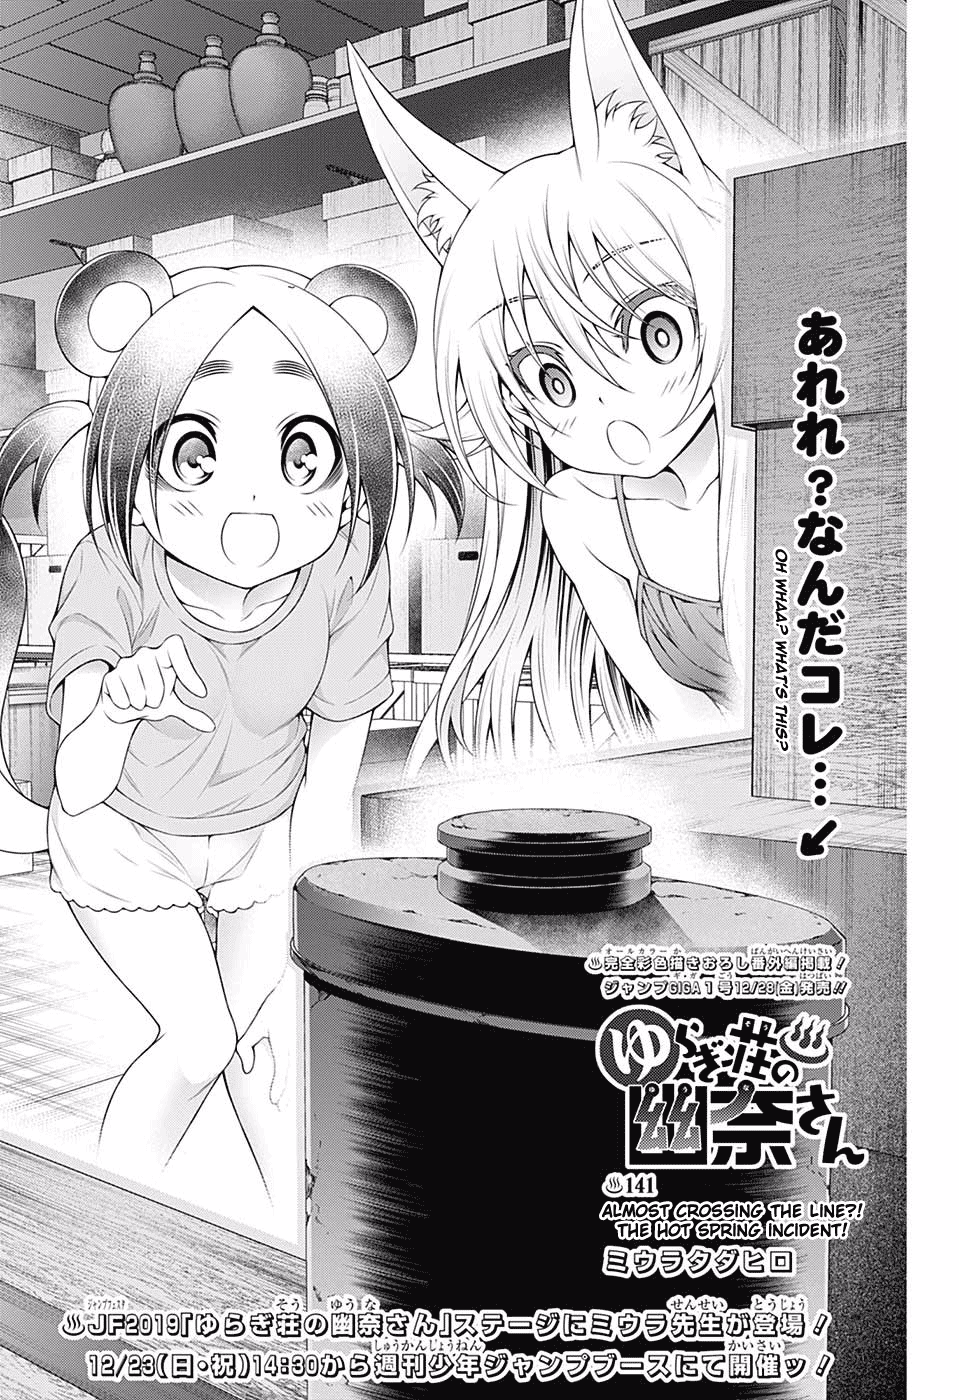 Yuragi-Sou No Yuuna-San Chapter 141: Almost Crossing The Line?! The Hot Spring Incident! - Picture 1